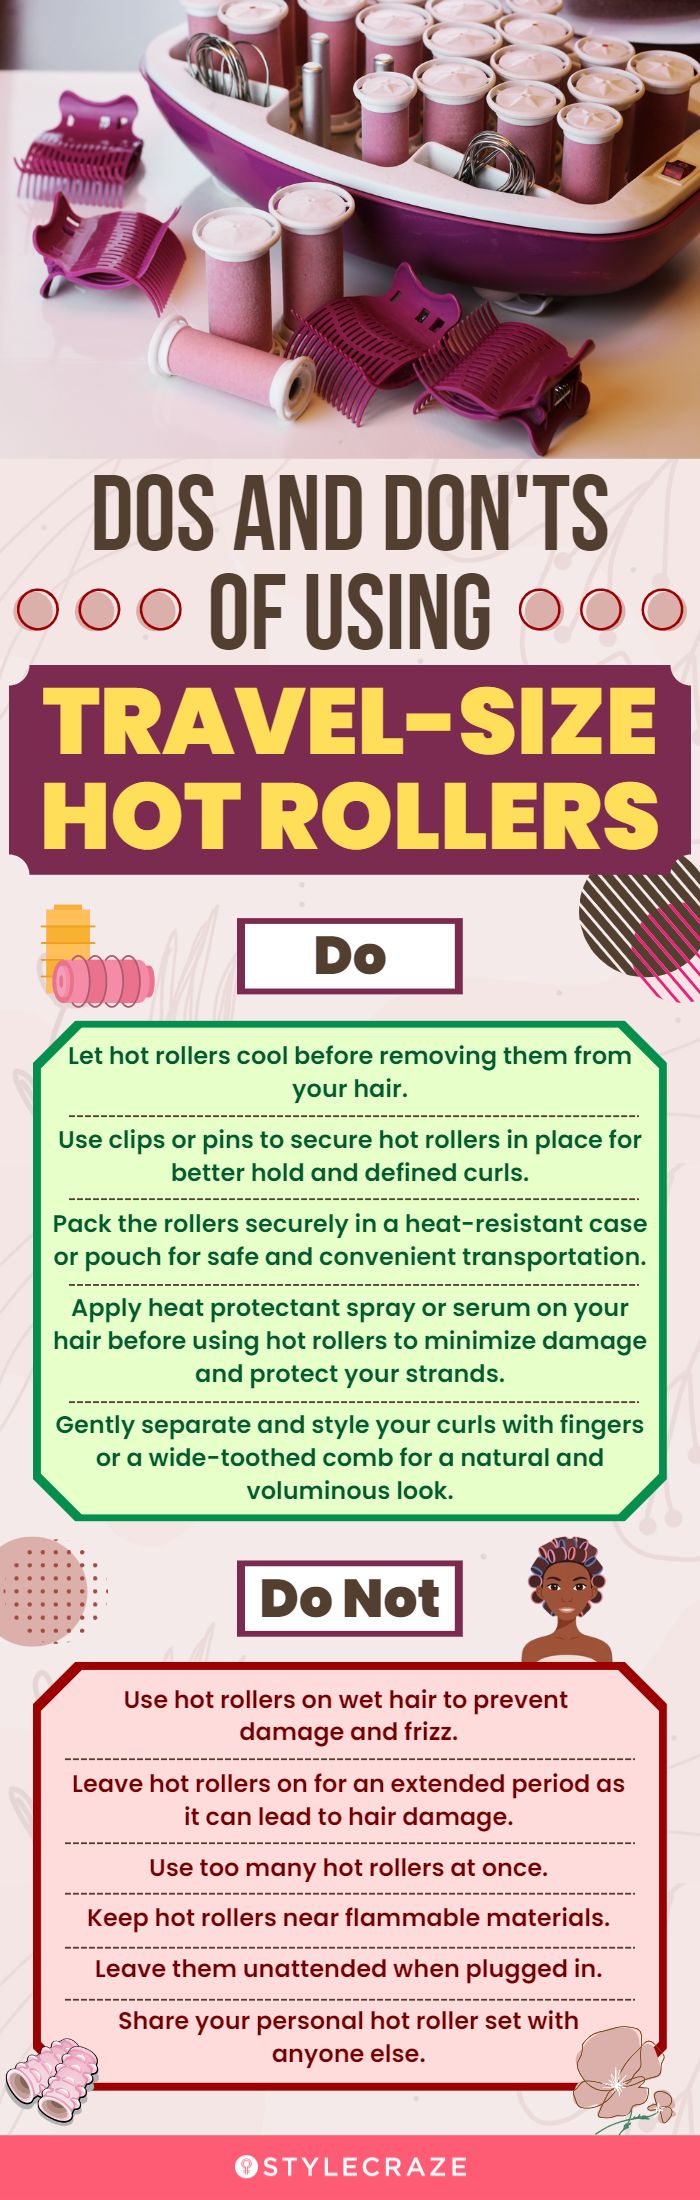 Dos And Don'ts Of Using Travel-Size Hot Rollers (infographic)